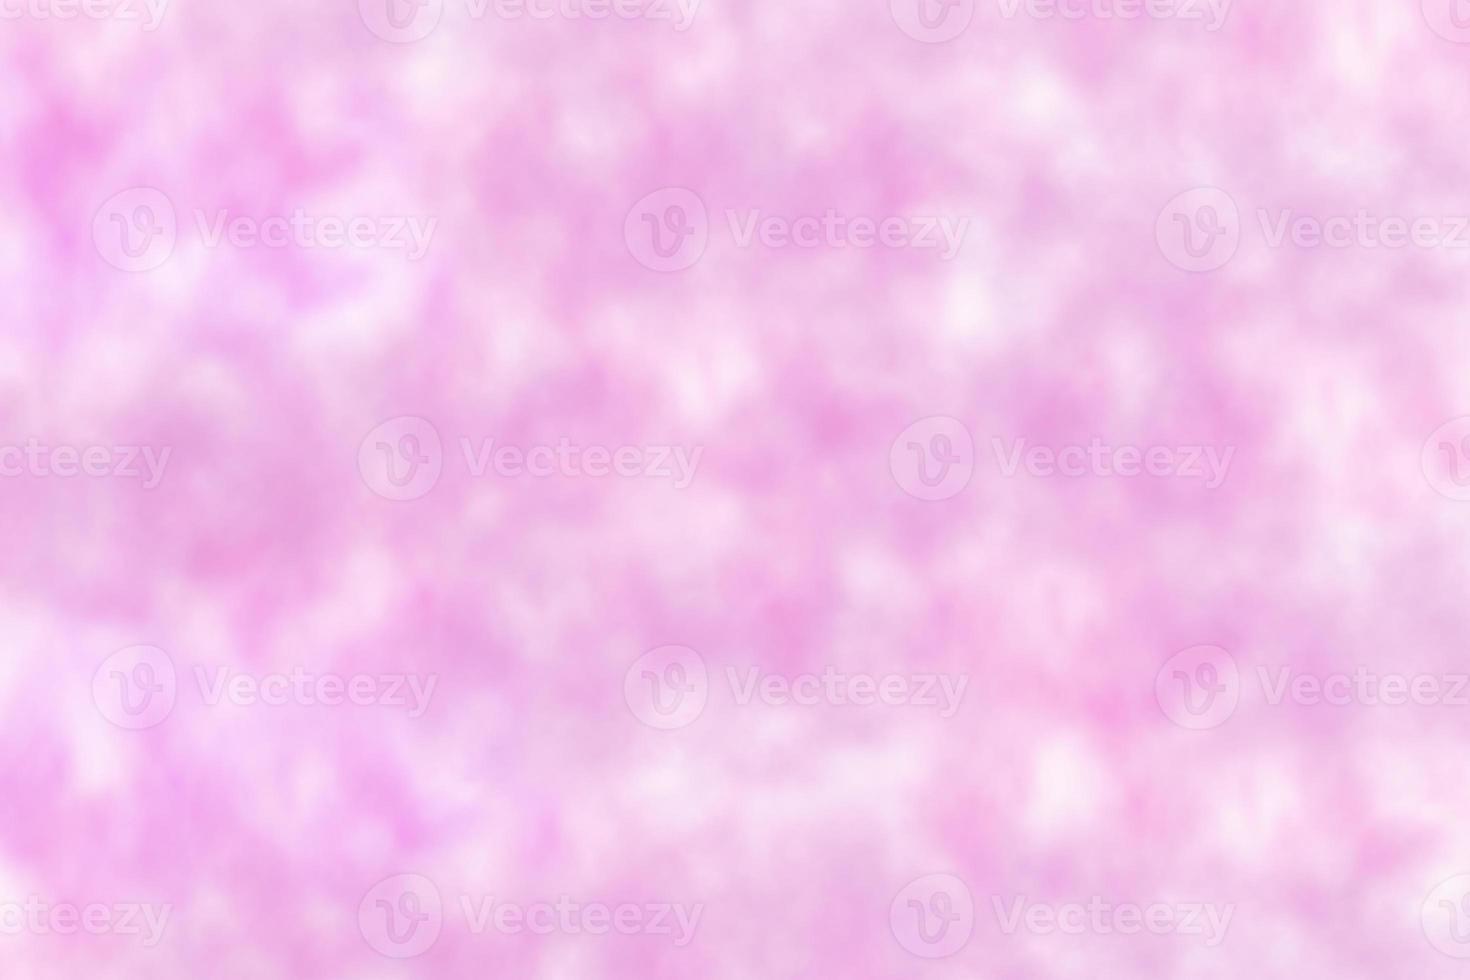 Pink watercolor with a textured background photo